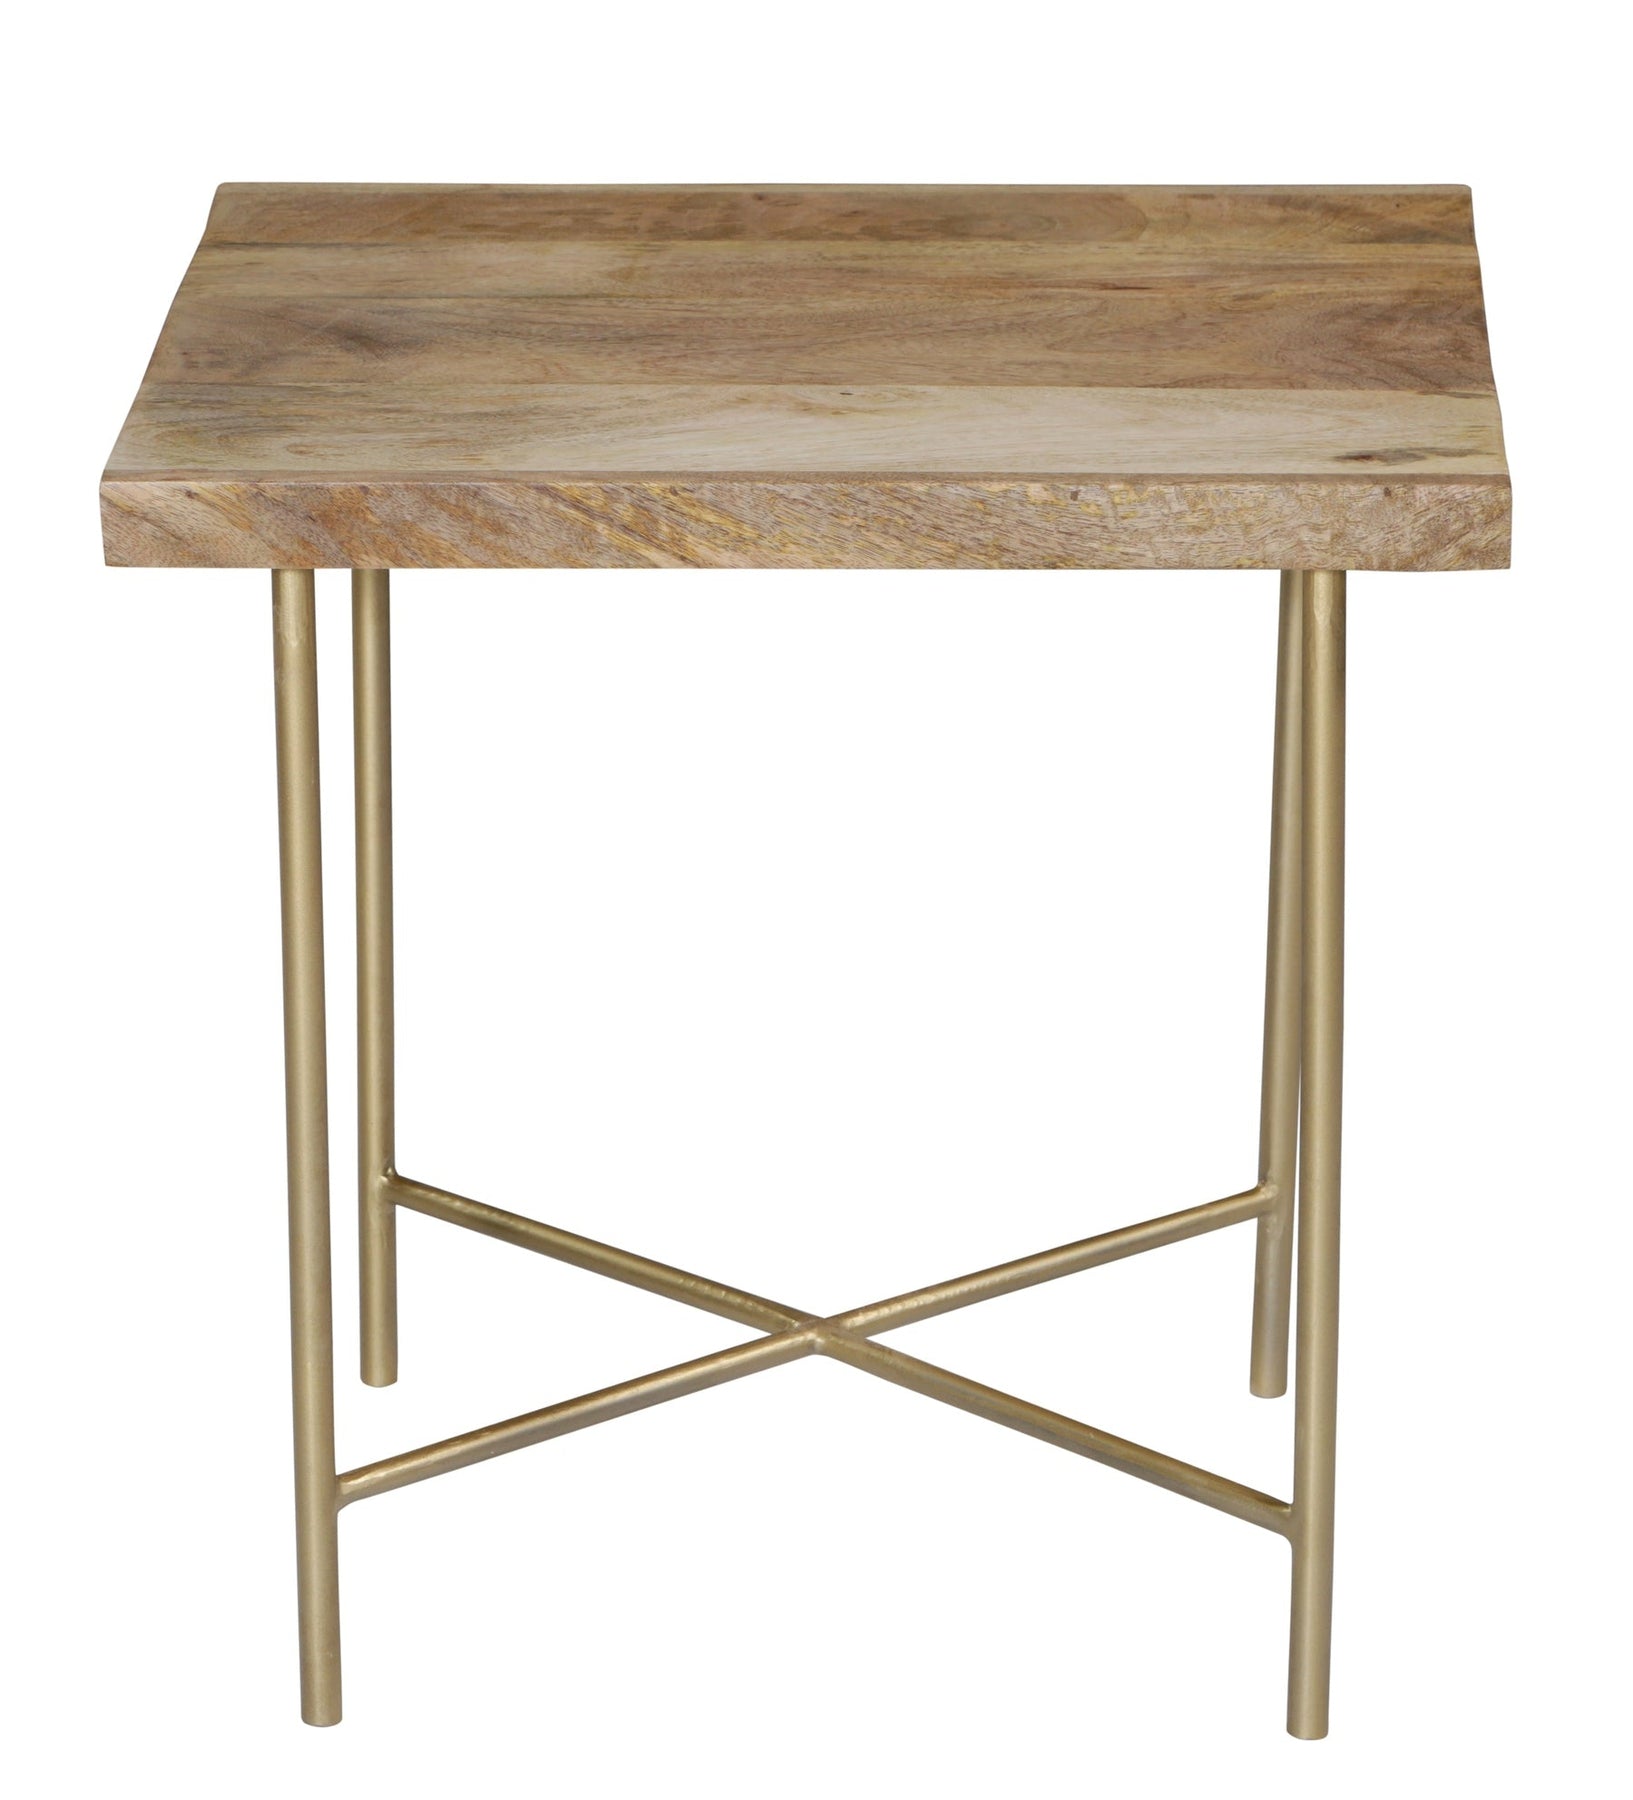 Wooden Ring Range Side Table - Wooden Living Room Side Table | 20x16x20 inches